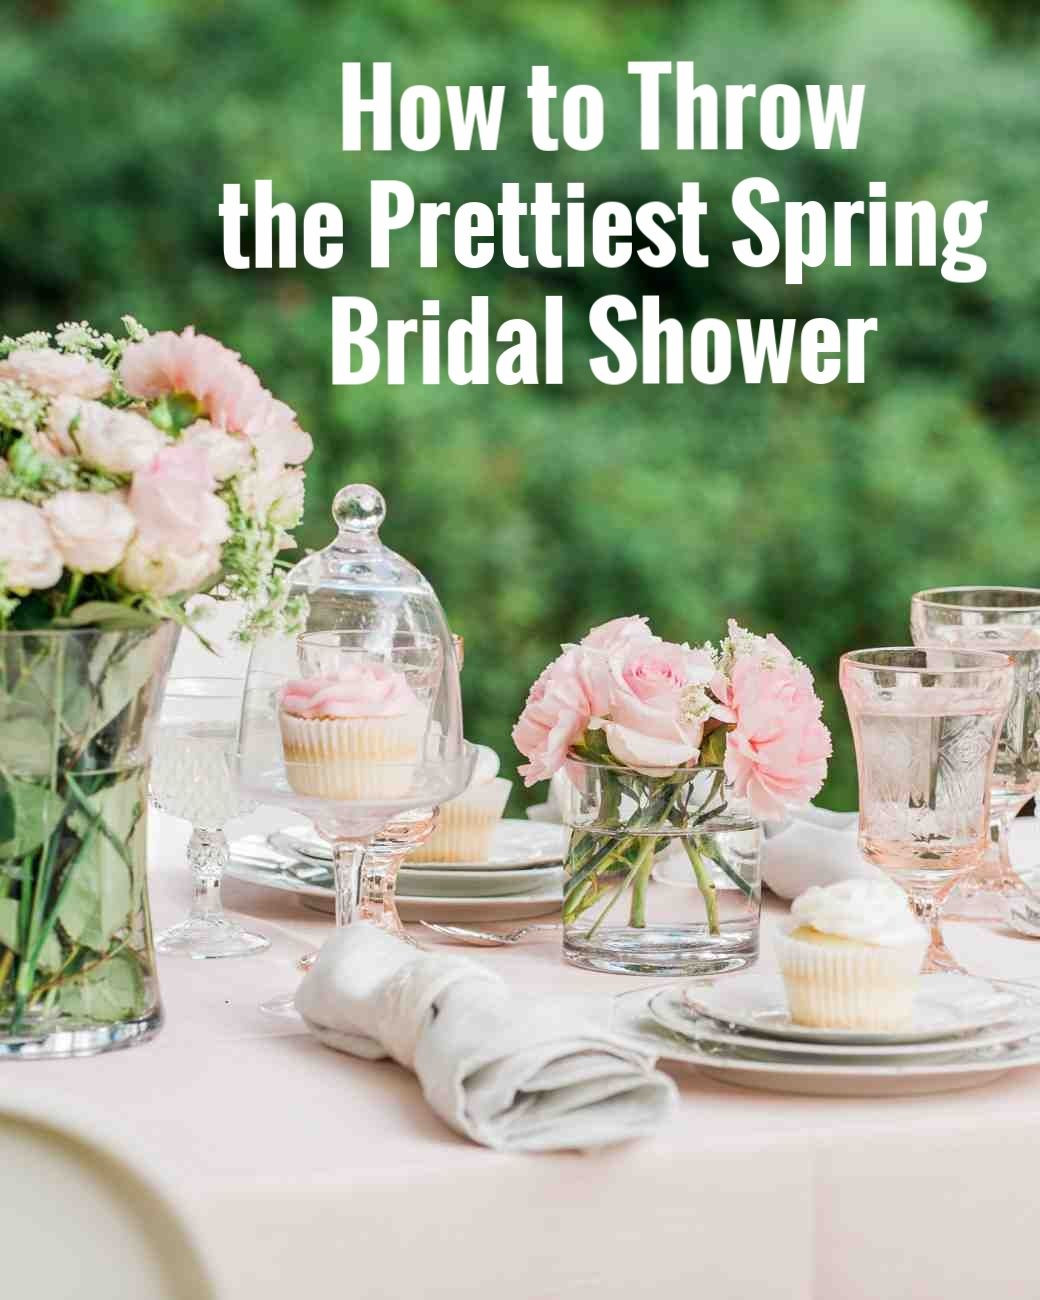 Engagement Party Ideas For Spring
 20 Ways to Throw the Prettiest Spring Bridal Shower